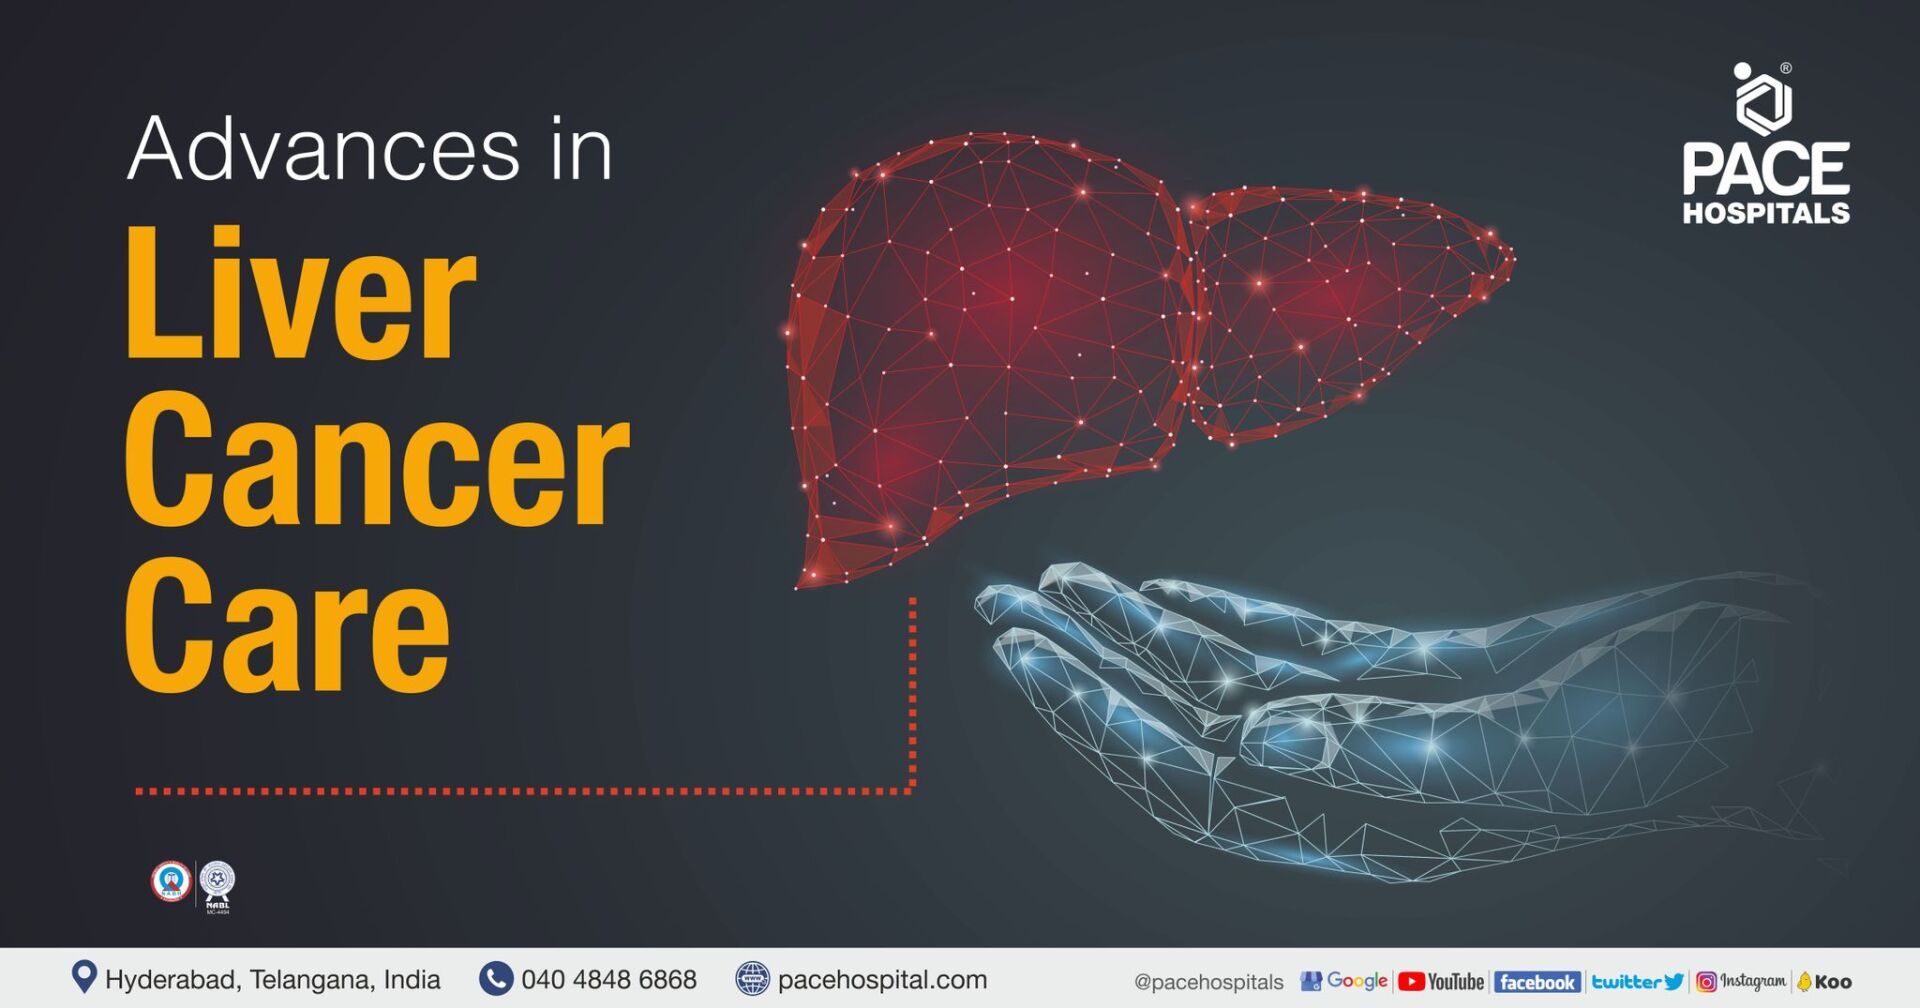 Advances in Liver Cancer Care - Chemotherapy, Liver Tumor Ablation and Liver Transplant